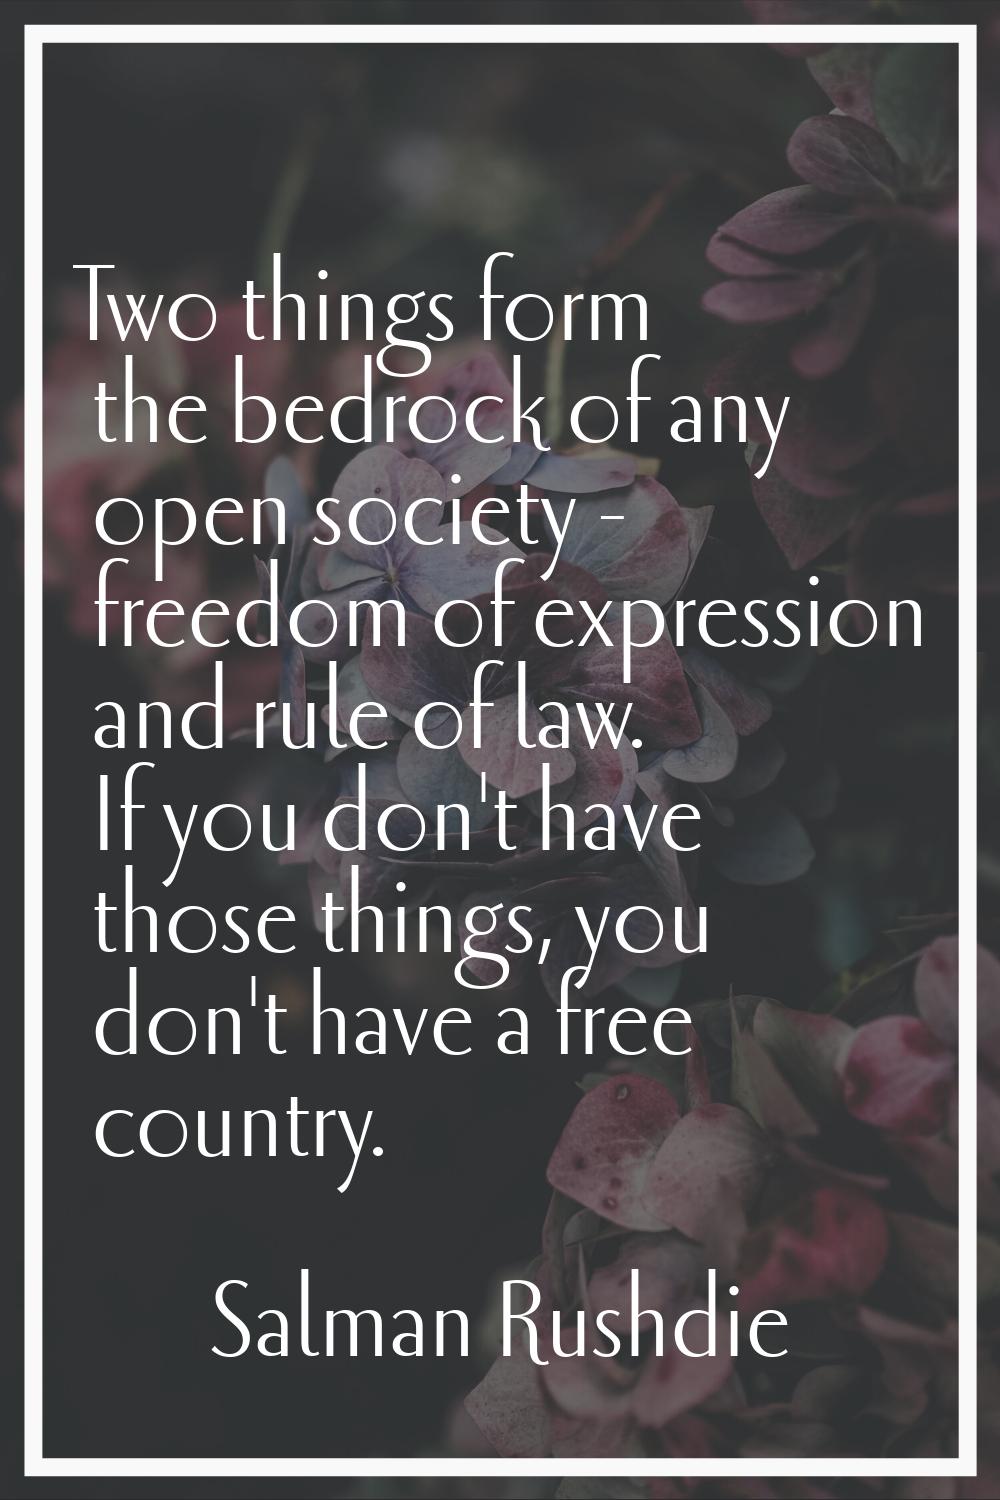 Two things form the bedrock of any open society - freedom of expression and rule of law. If you don